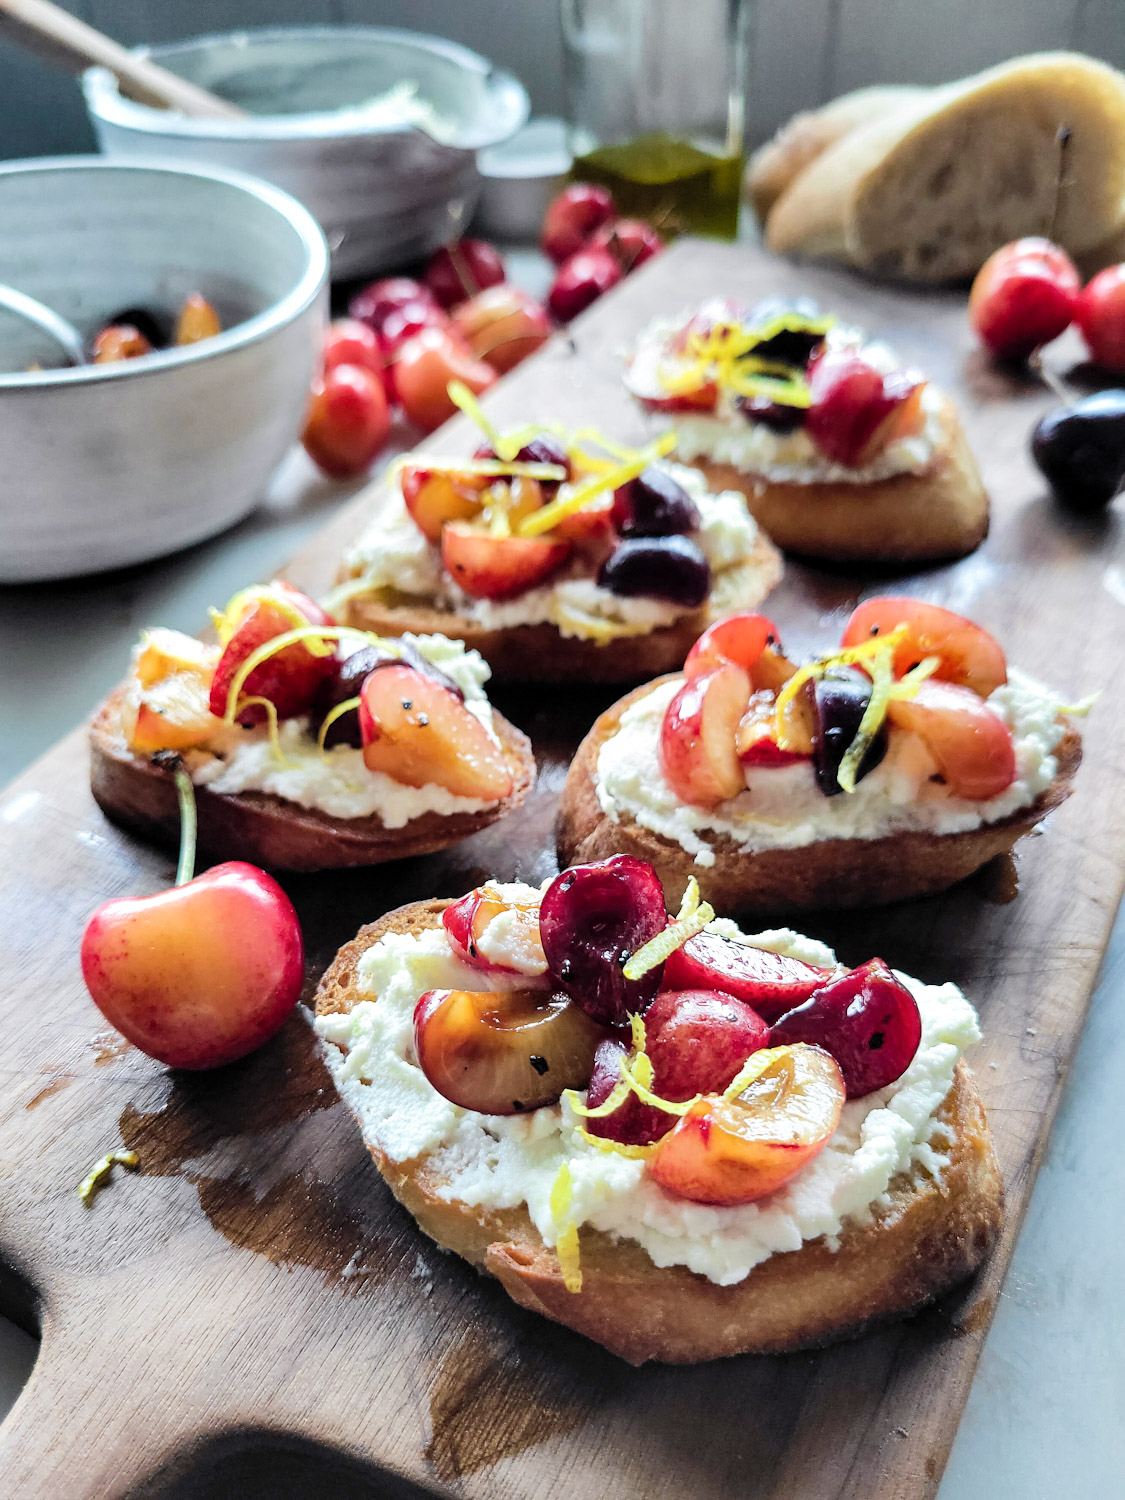 A wooden cutting board with toasted crostini slices spread with lemon ricotta cheese and topped with macerated chopped cherries